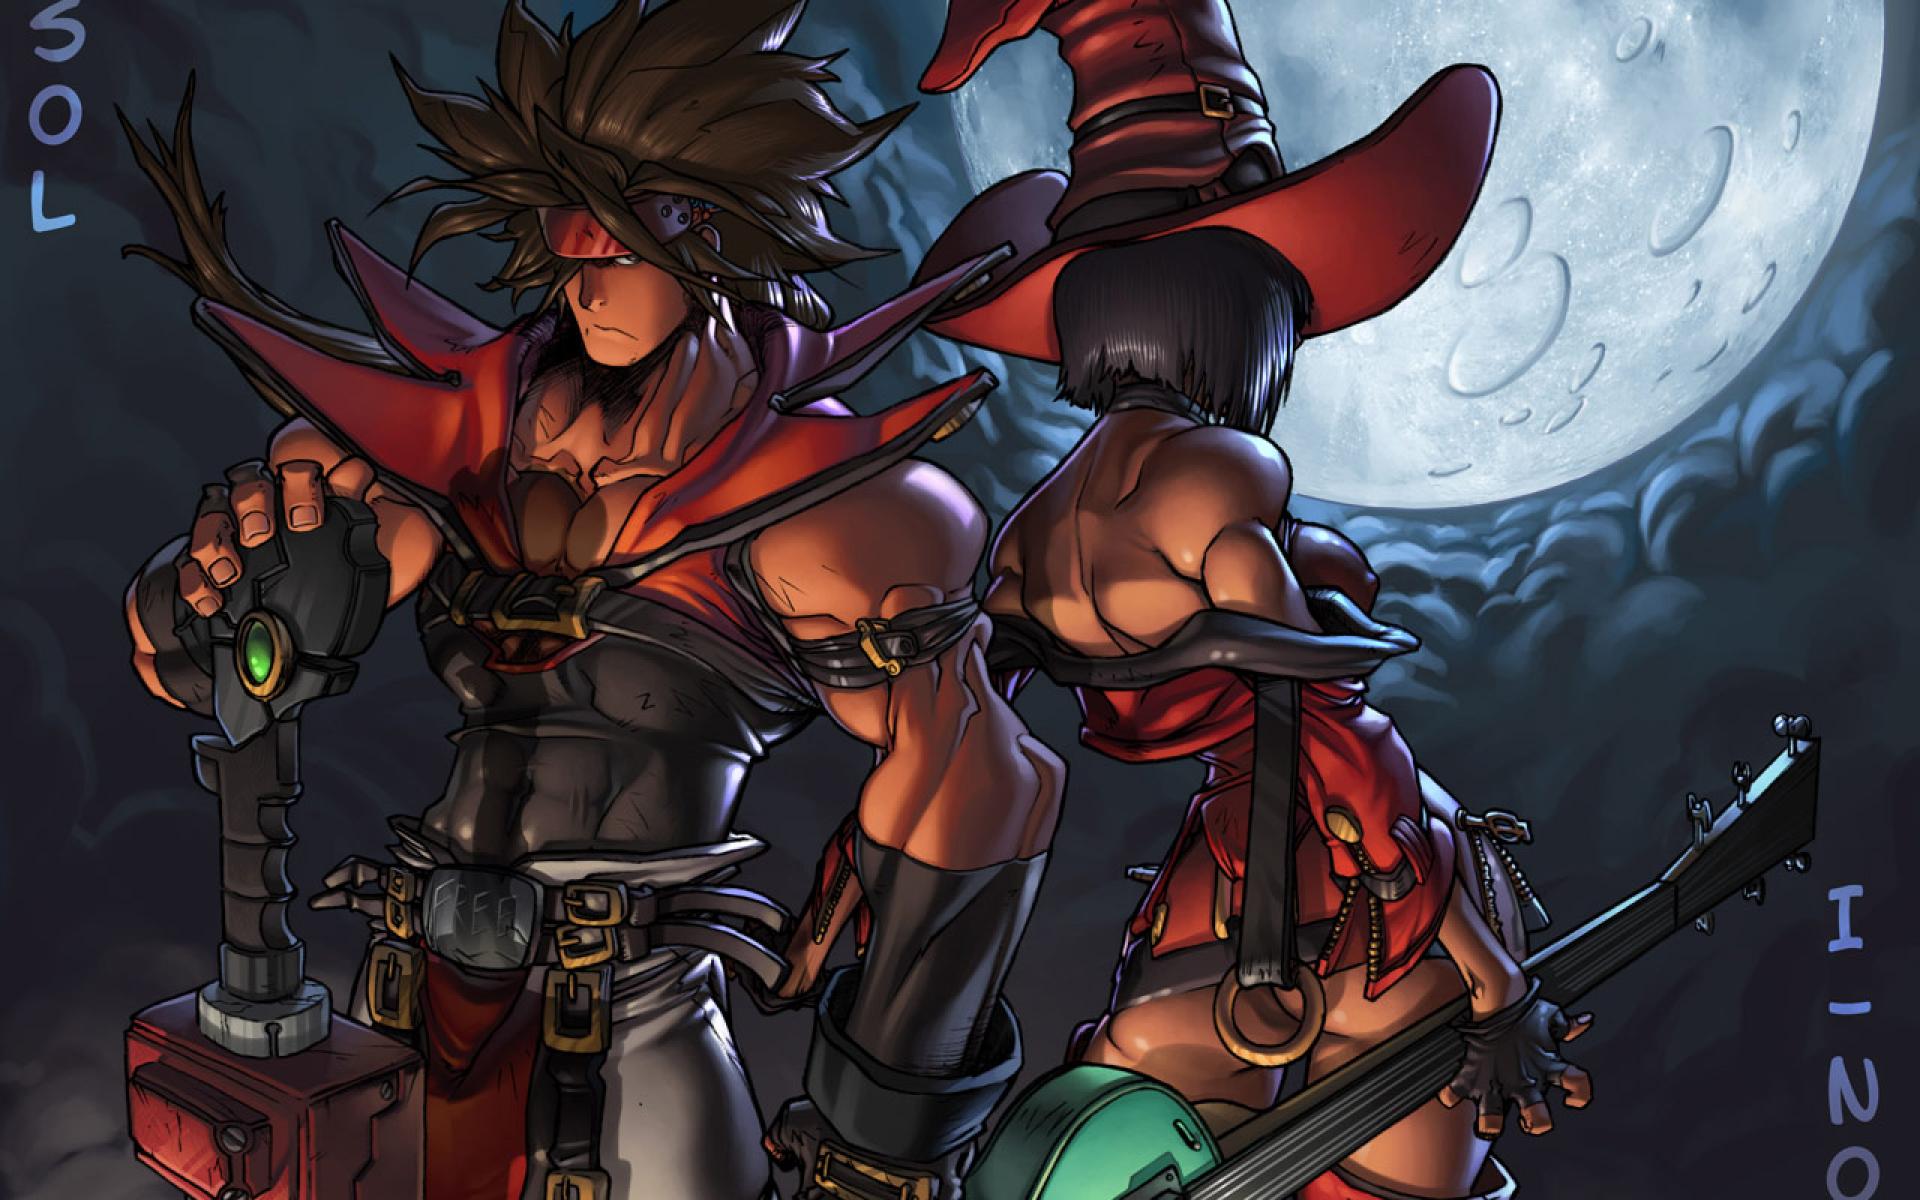 Guilty gear sol badguy wallpaper - (#169576) - High Quality and ...